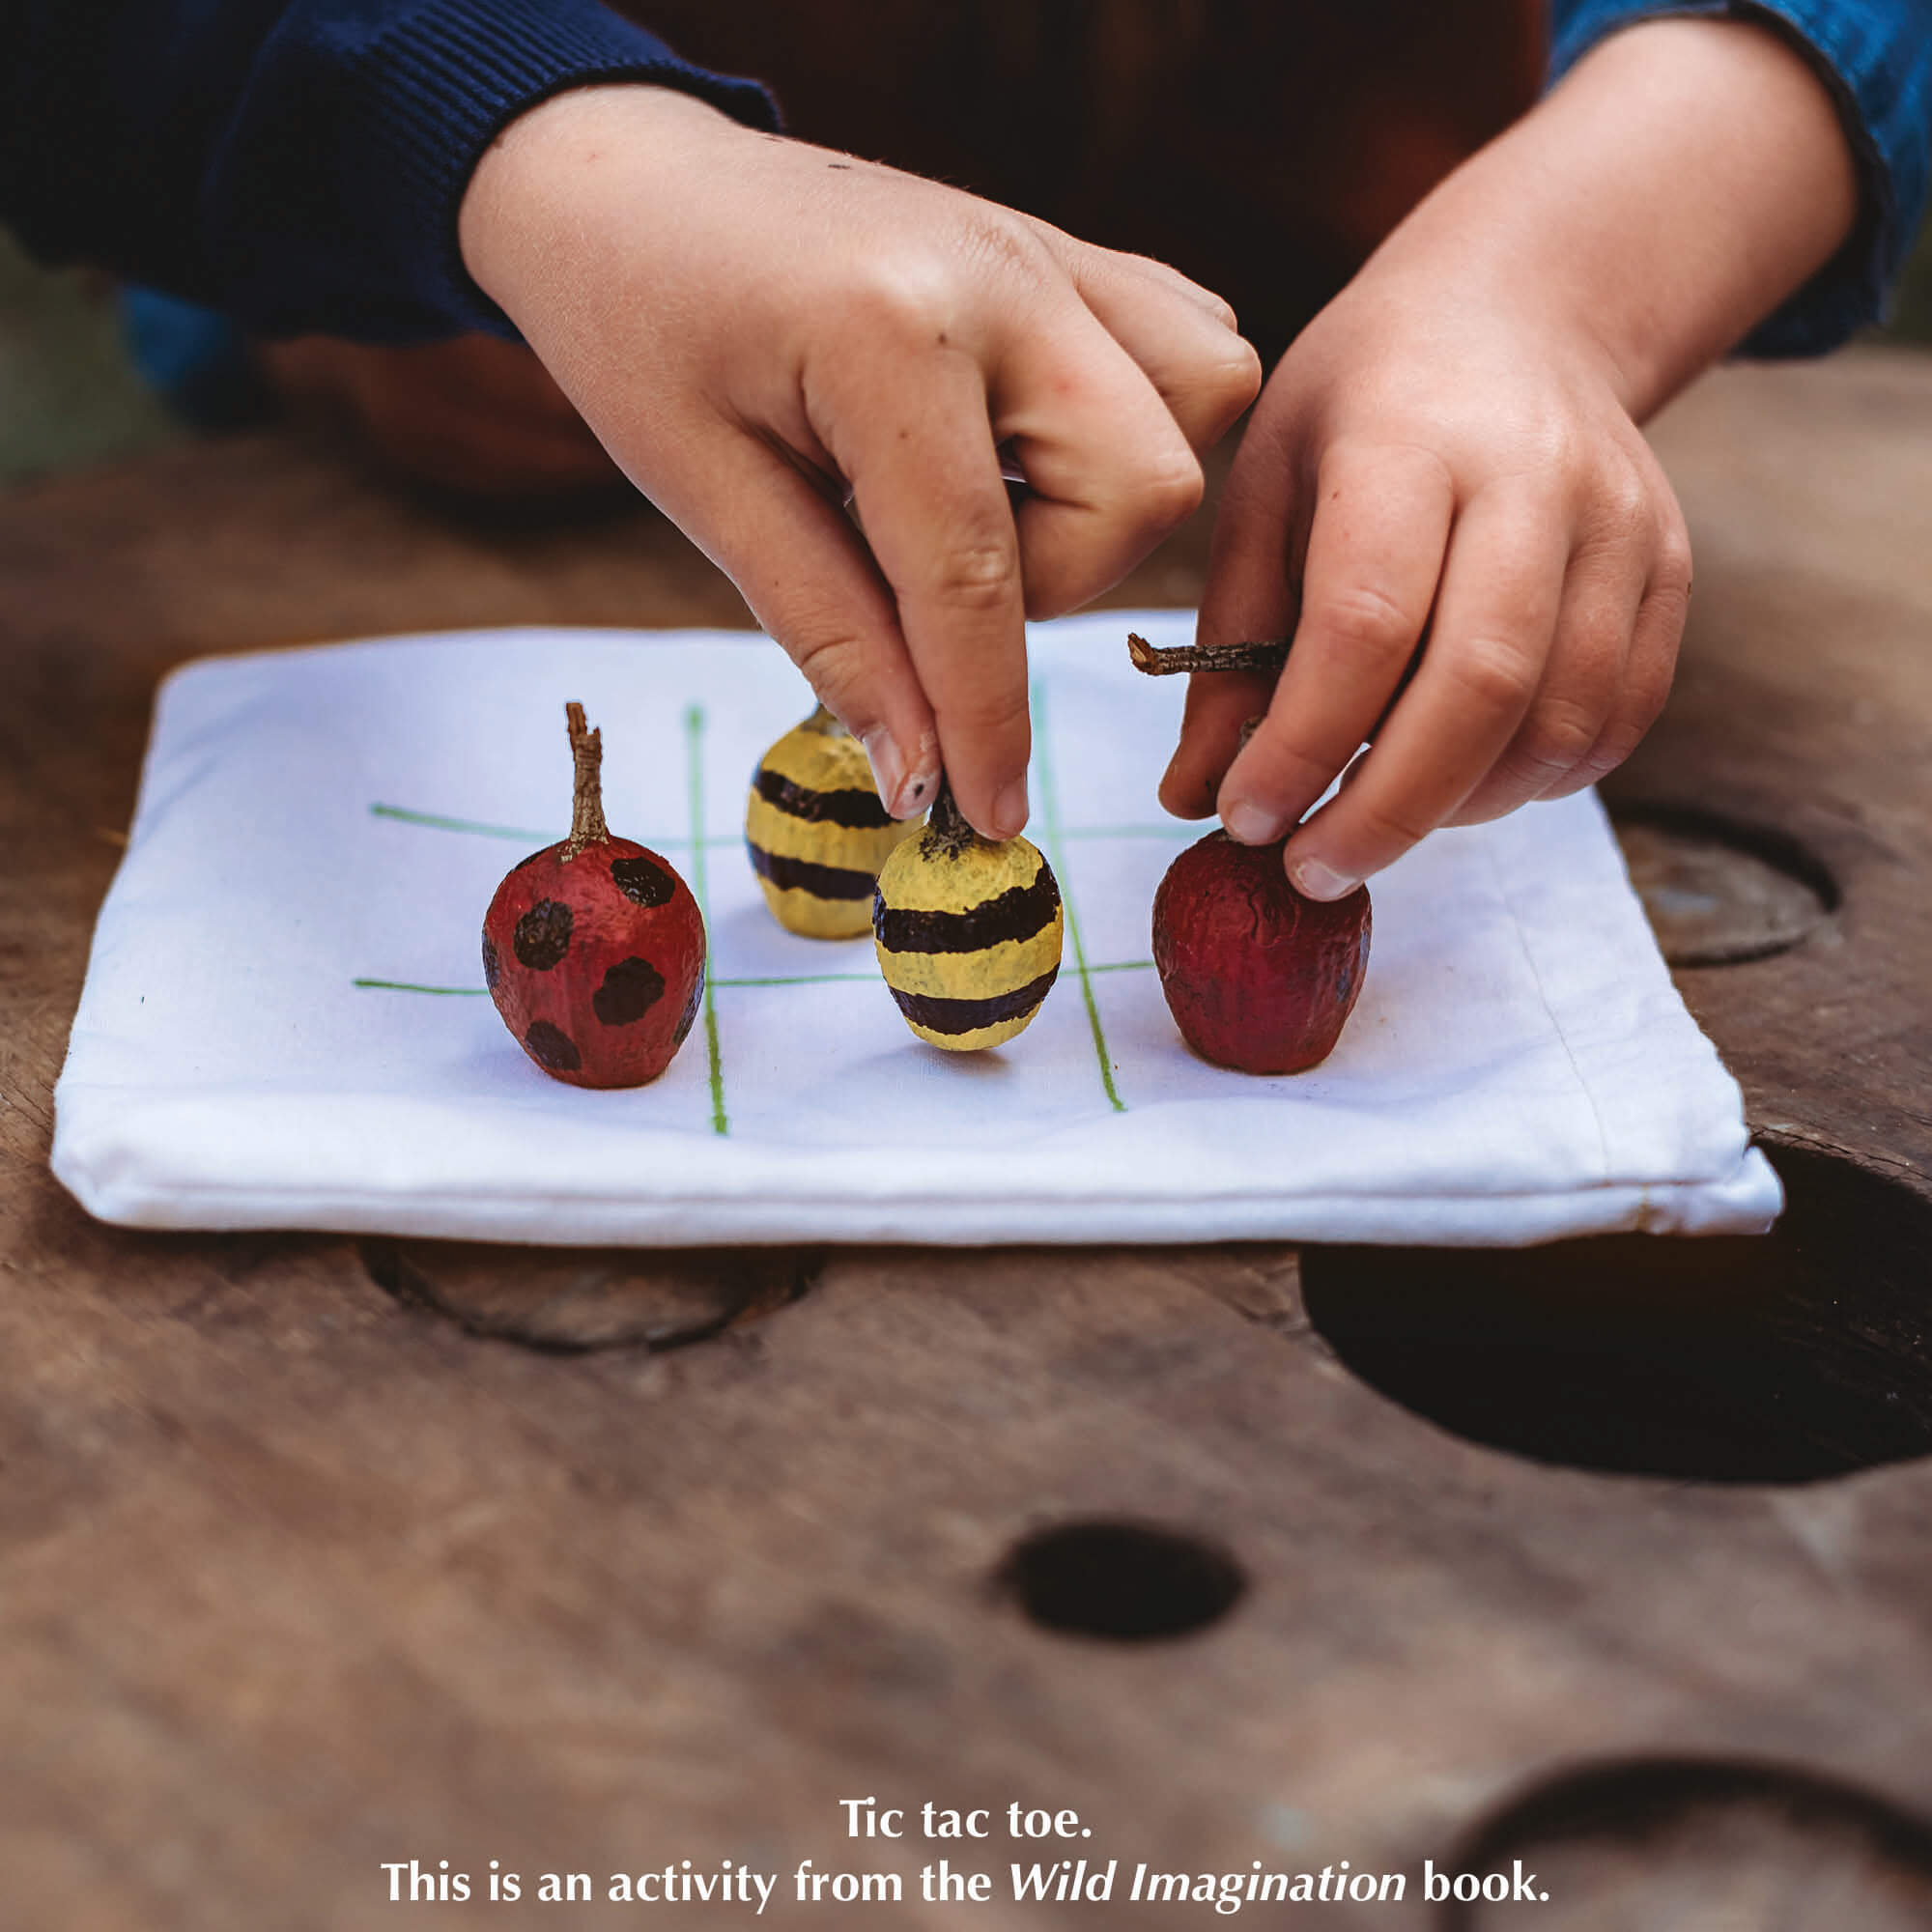 Tic tac toe using gumnuts using paint pens as featured in Nature Craft Starter Pack from Your Wild Books includes Wild Imagination book, Wild Child book, paint pens in classic colours and an opinel beginners whittling knife. Save 20%